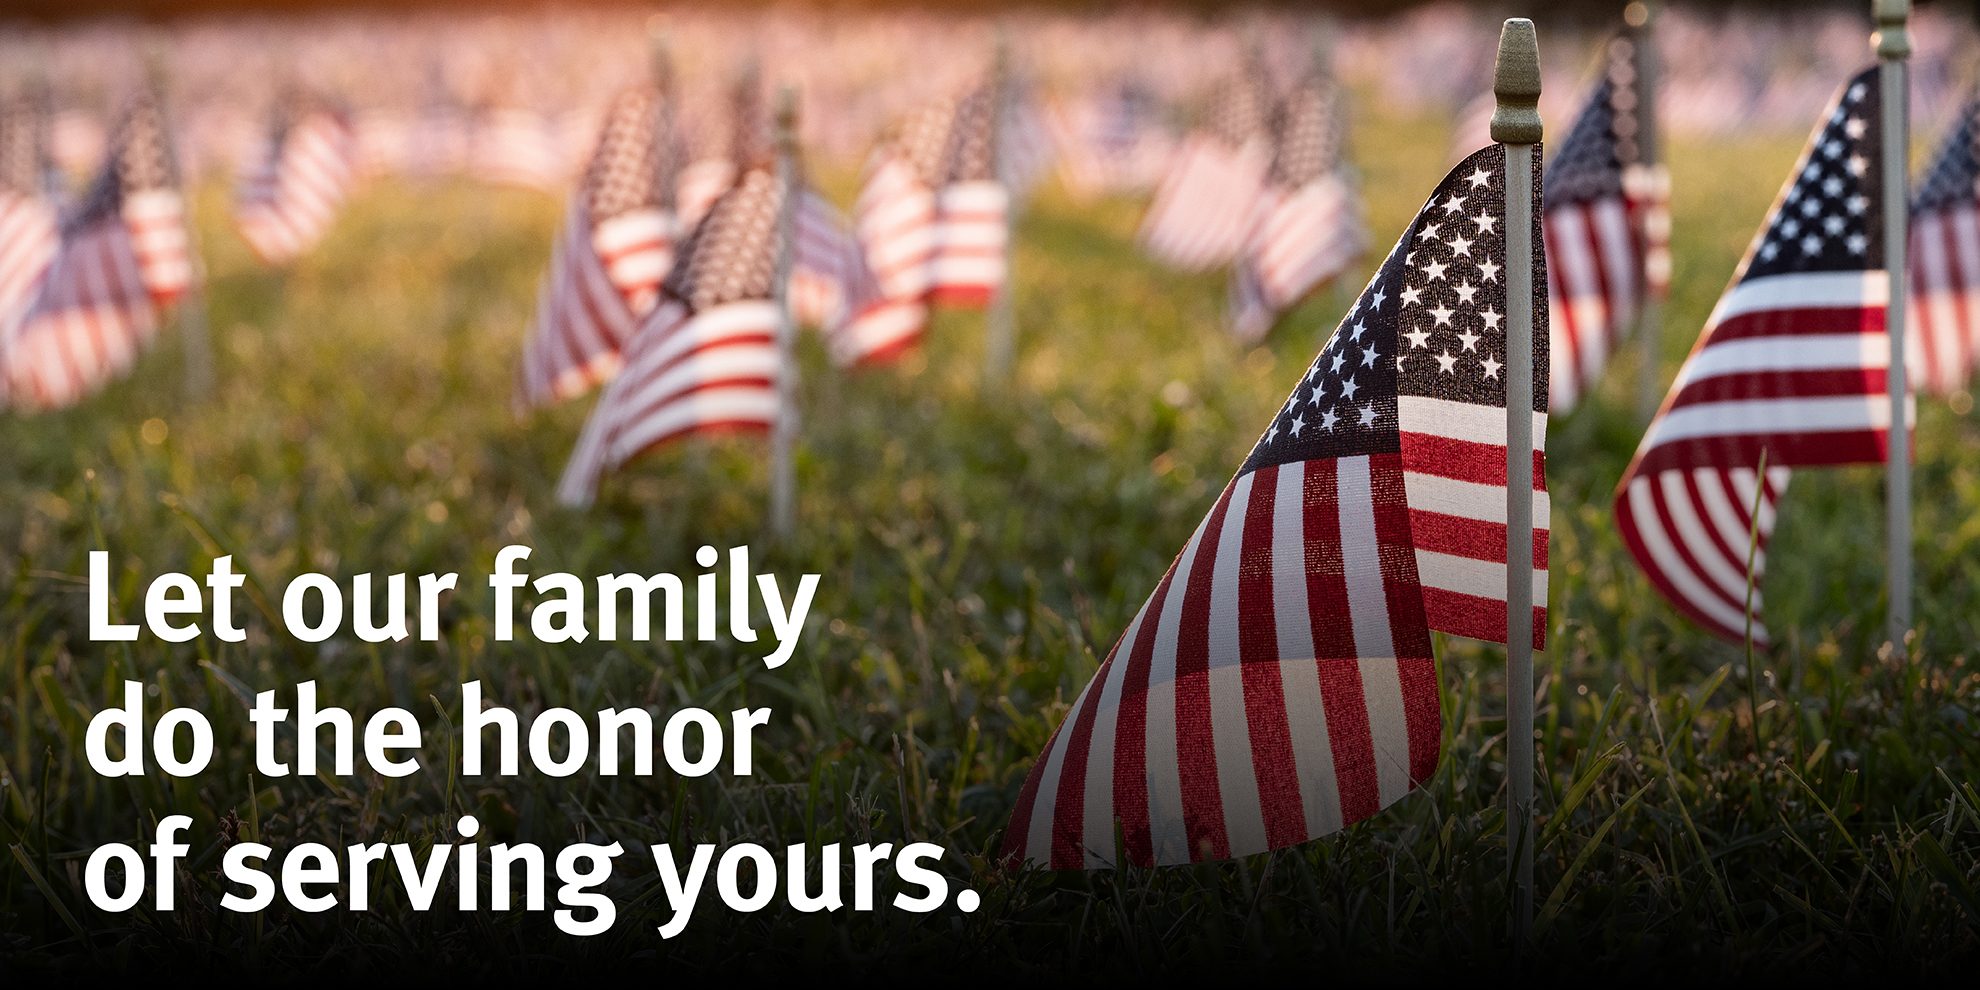 Let our family do the honor of serving yours.